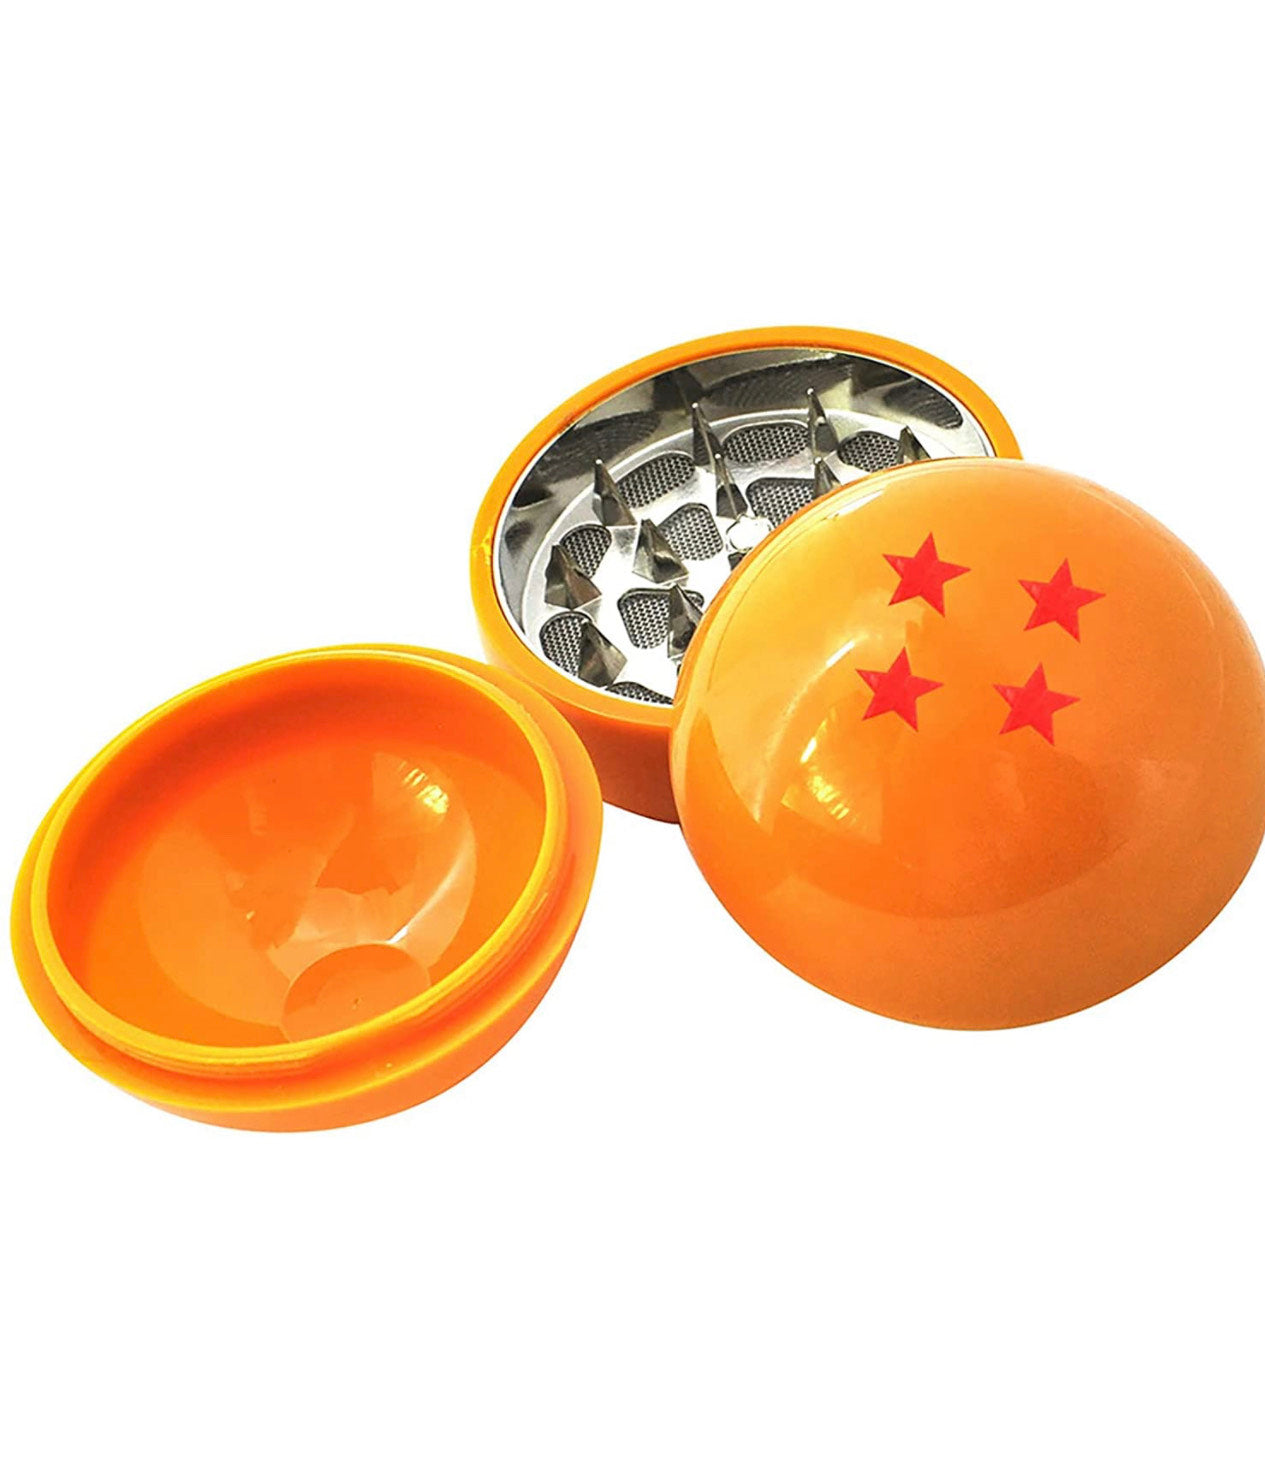 DBZ ball All Stars Herbal and spice Grinder kitchenware Gift Anime fan collectable